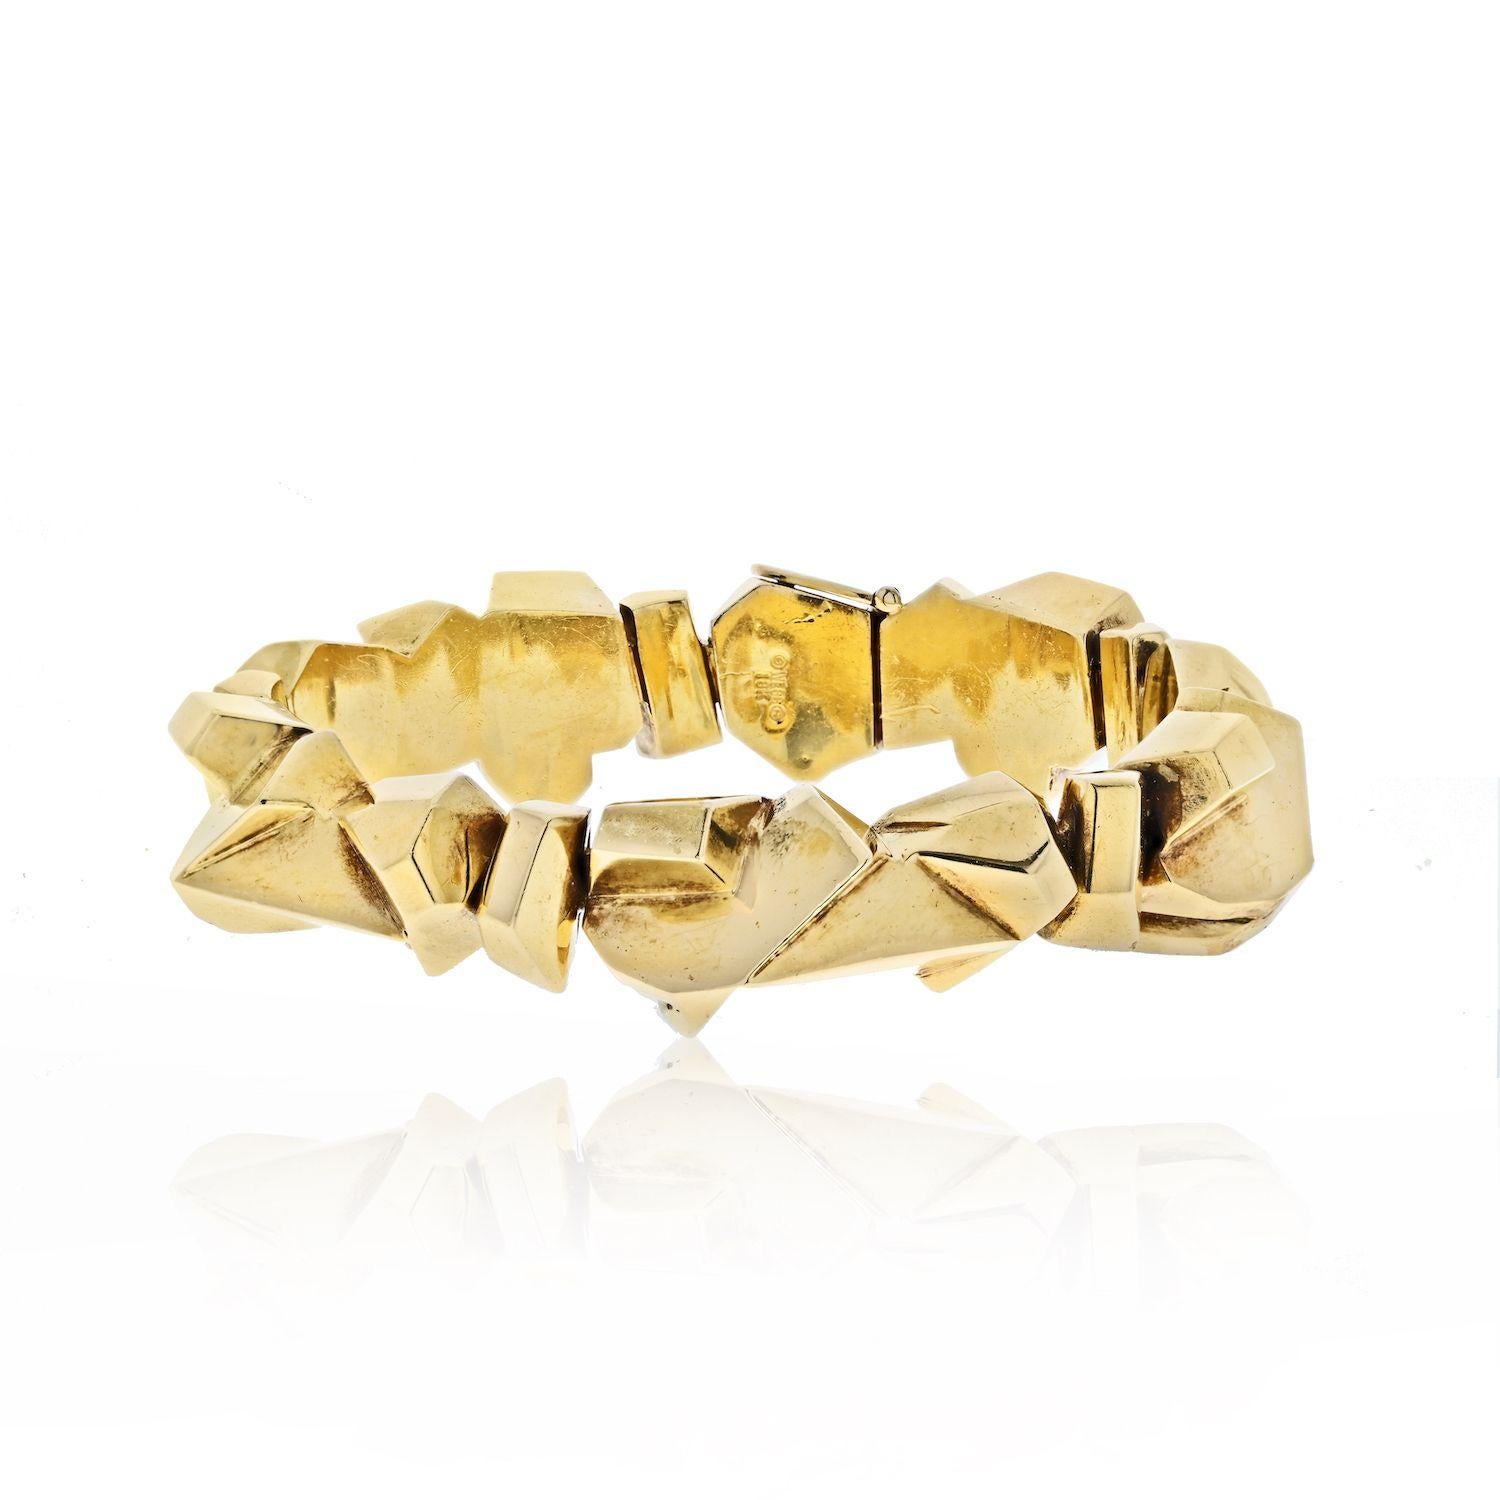 This is an articulated yellow gold ski slope nugget bracelet by David Webb. Comes with the certificate from David Webb.
Wrist size circumference: 8 inches. 
The bracelets can be paired with the D.Webb matching earrings. 
The earrings are sold